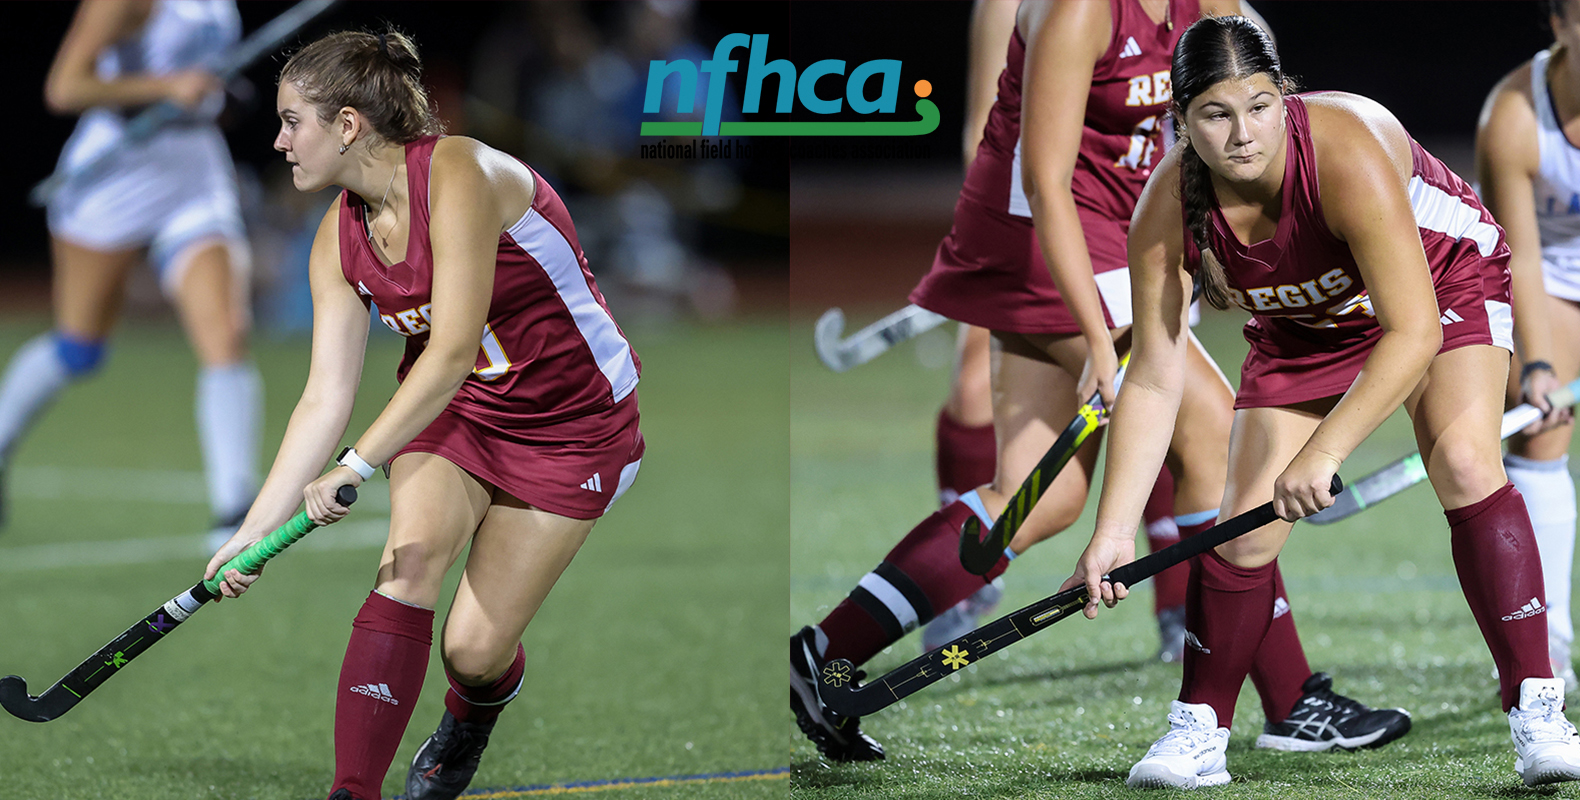 NFHCA recognizes Bell and Mannone as Division III Scholars of Distinction